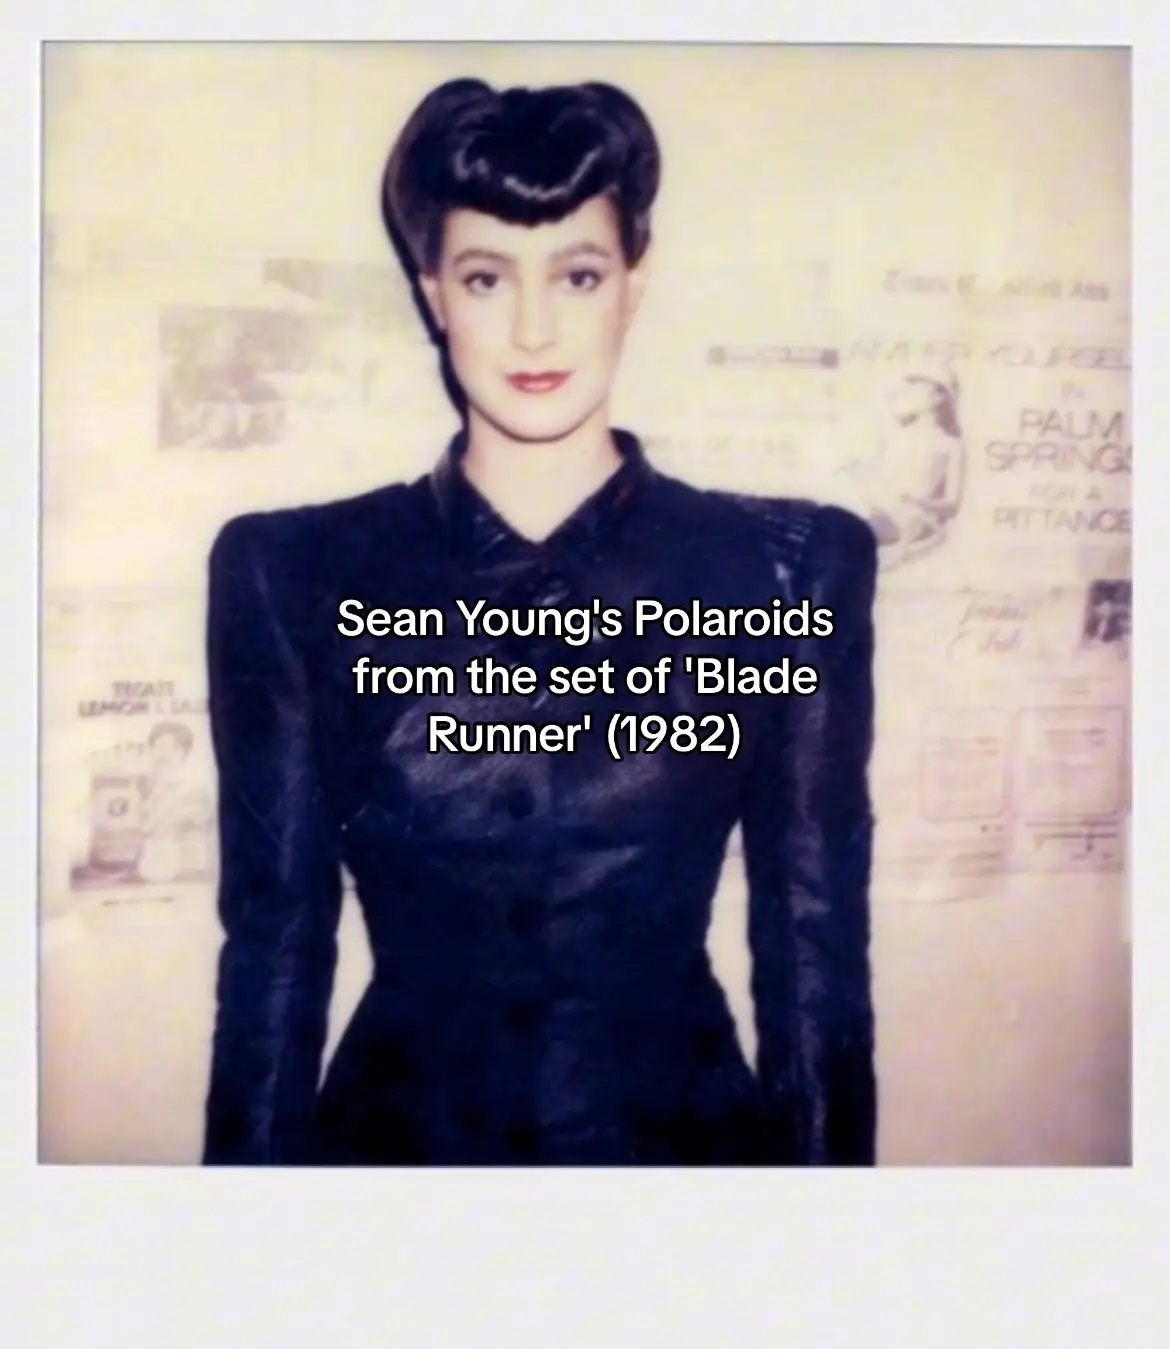 Sean Young's Polaroids from the set of 'Blade Runner' (1982)